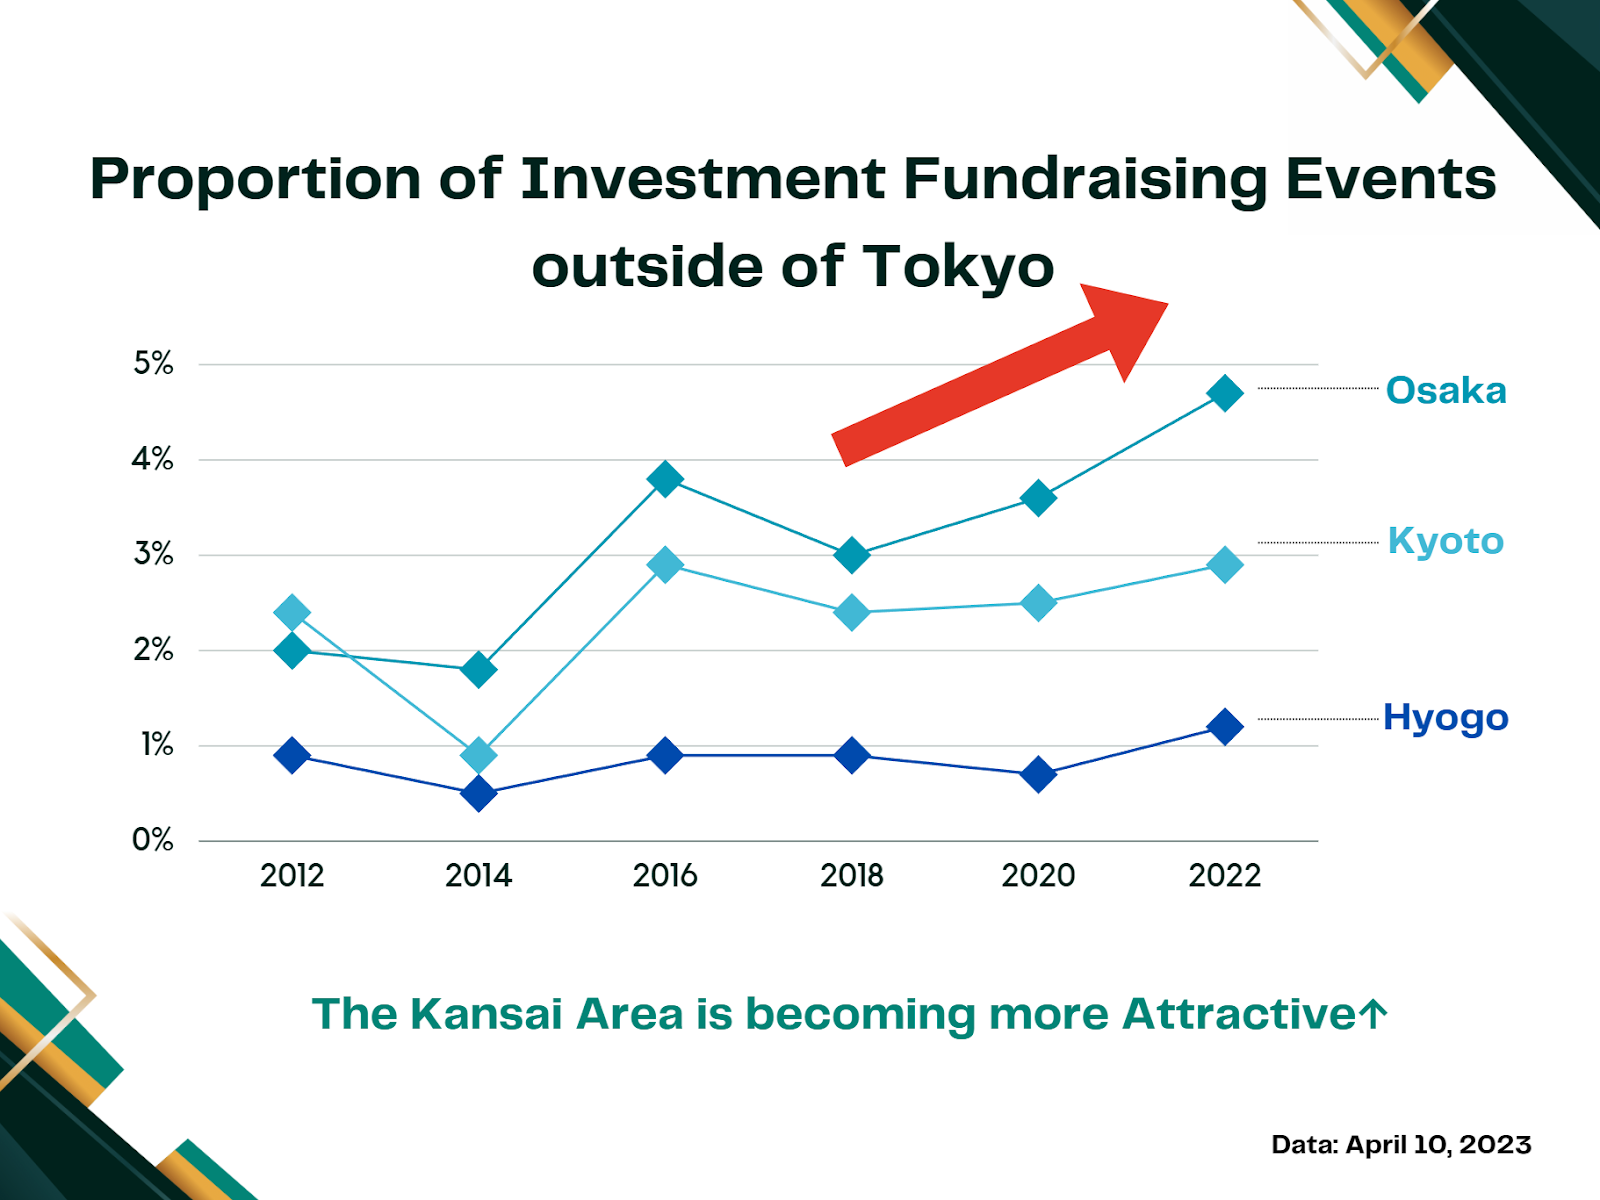 Proportion of investment fundraising events outside of Tokyo line chart